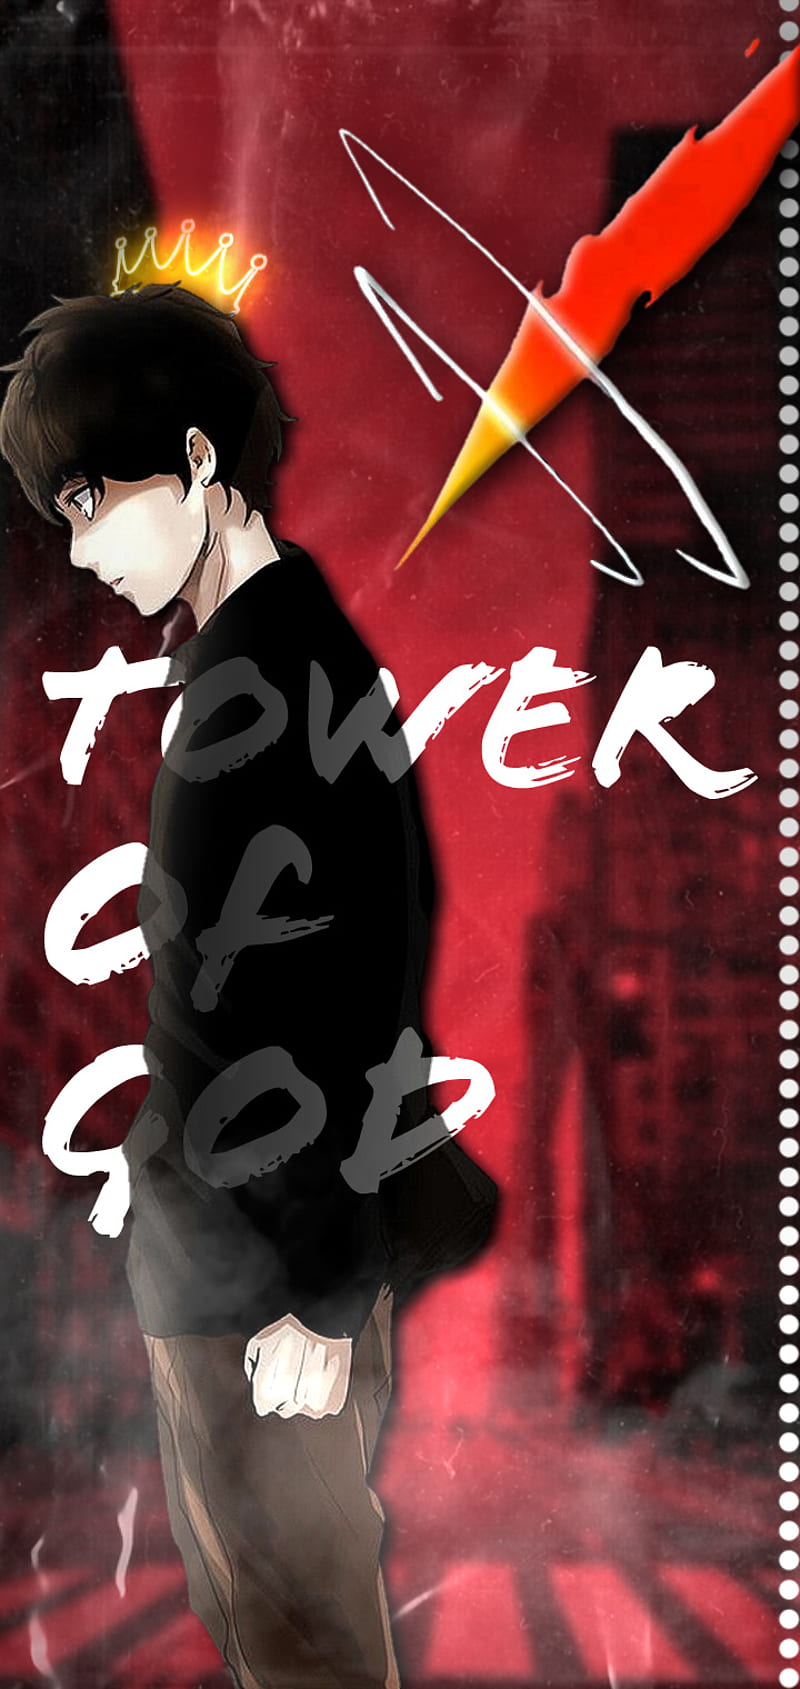 Tower Of God Ending Explained: Why Did Rachel Betray Bam?